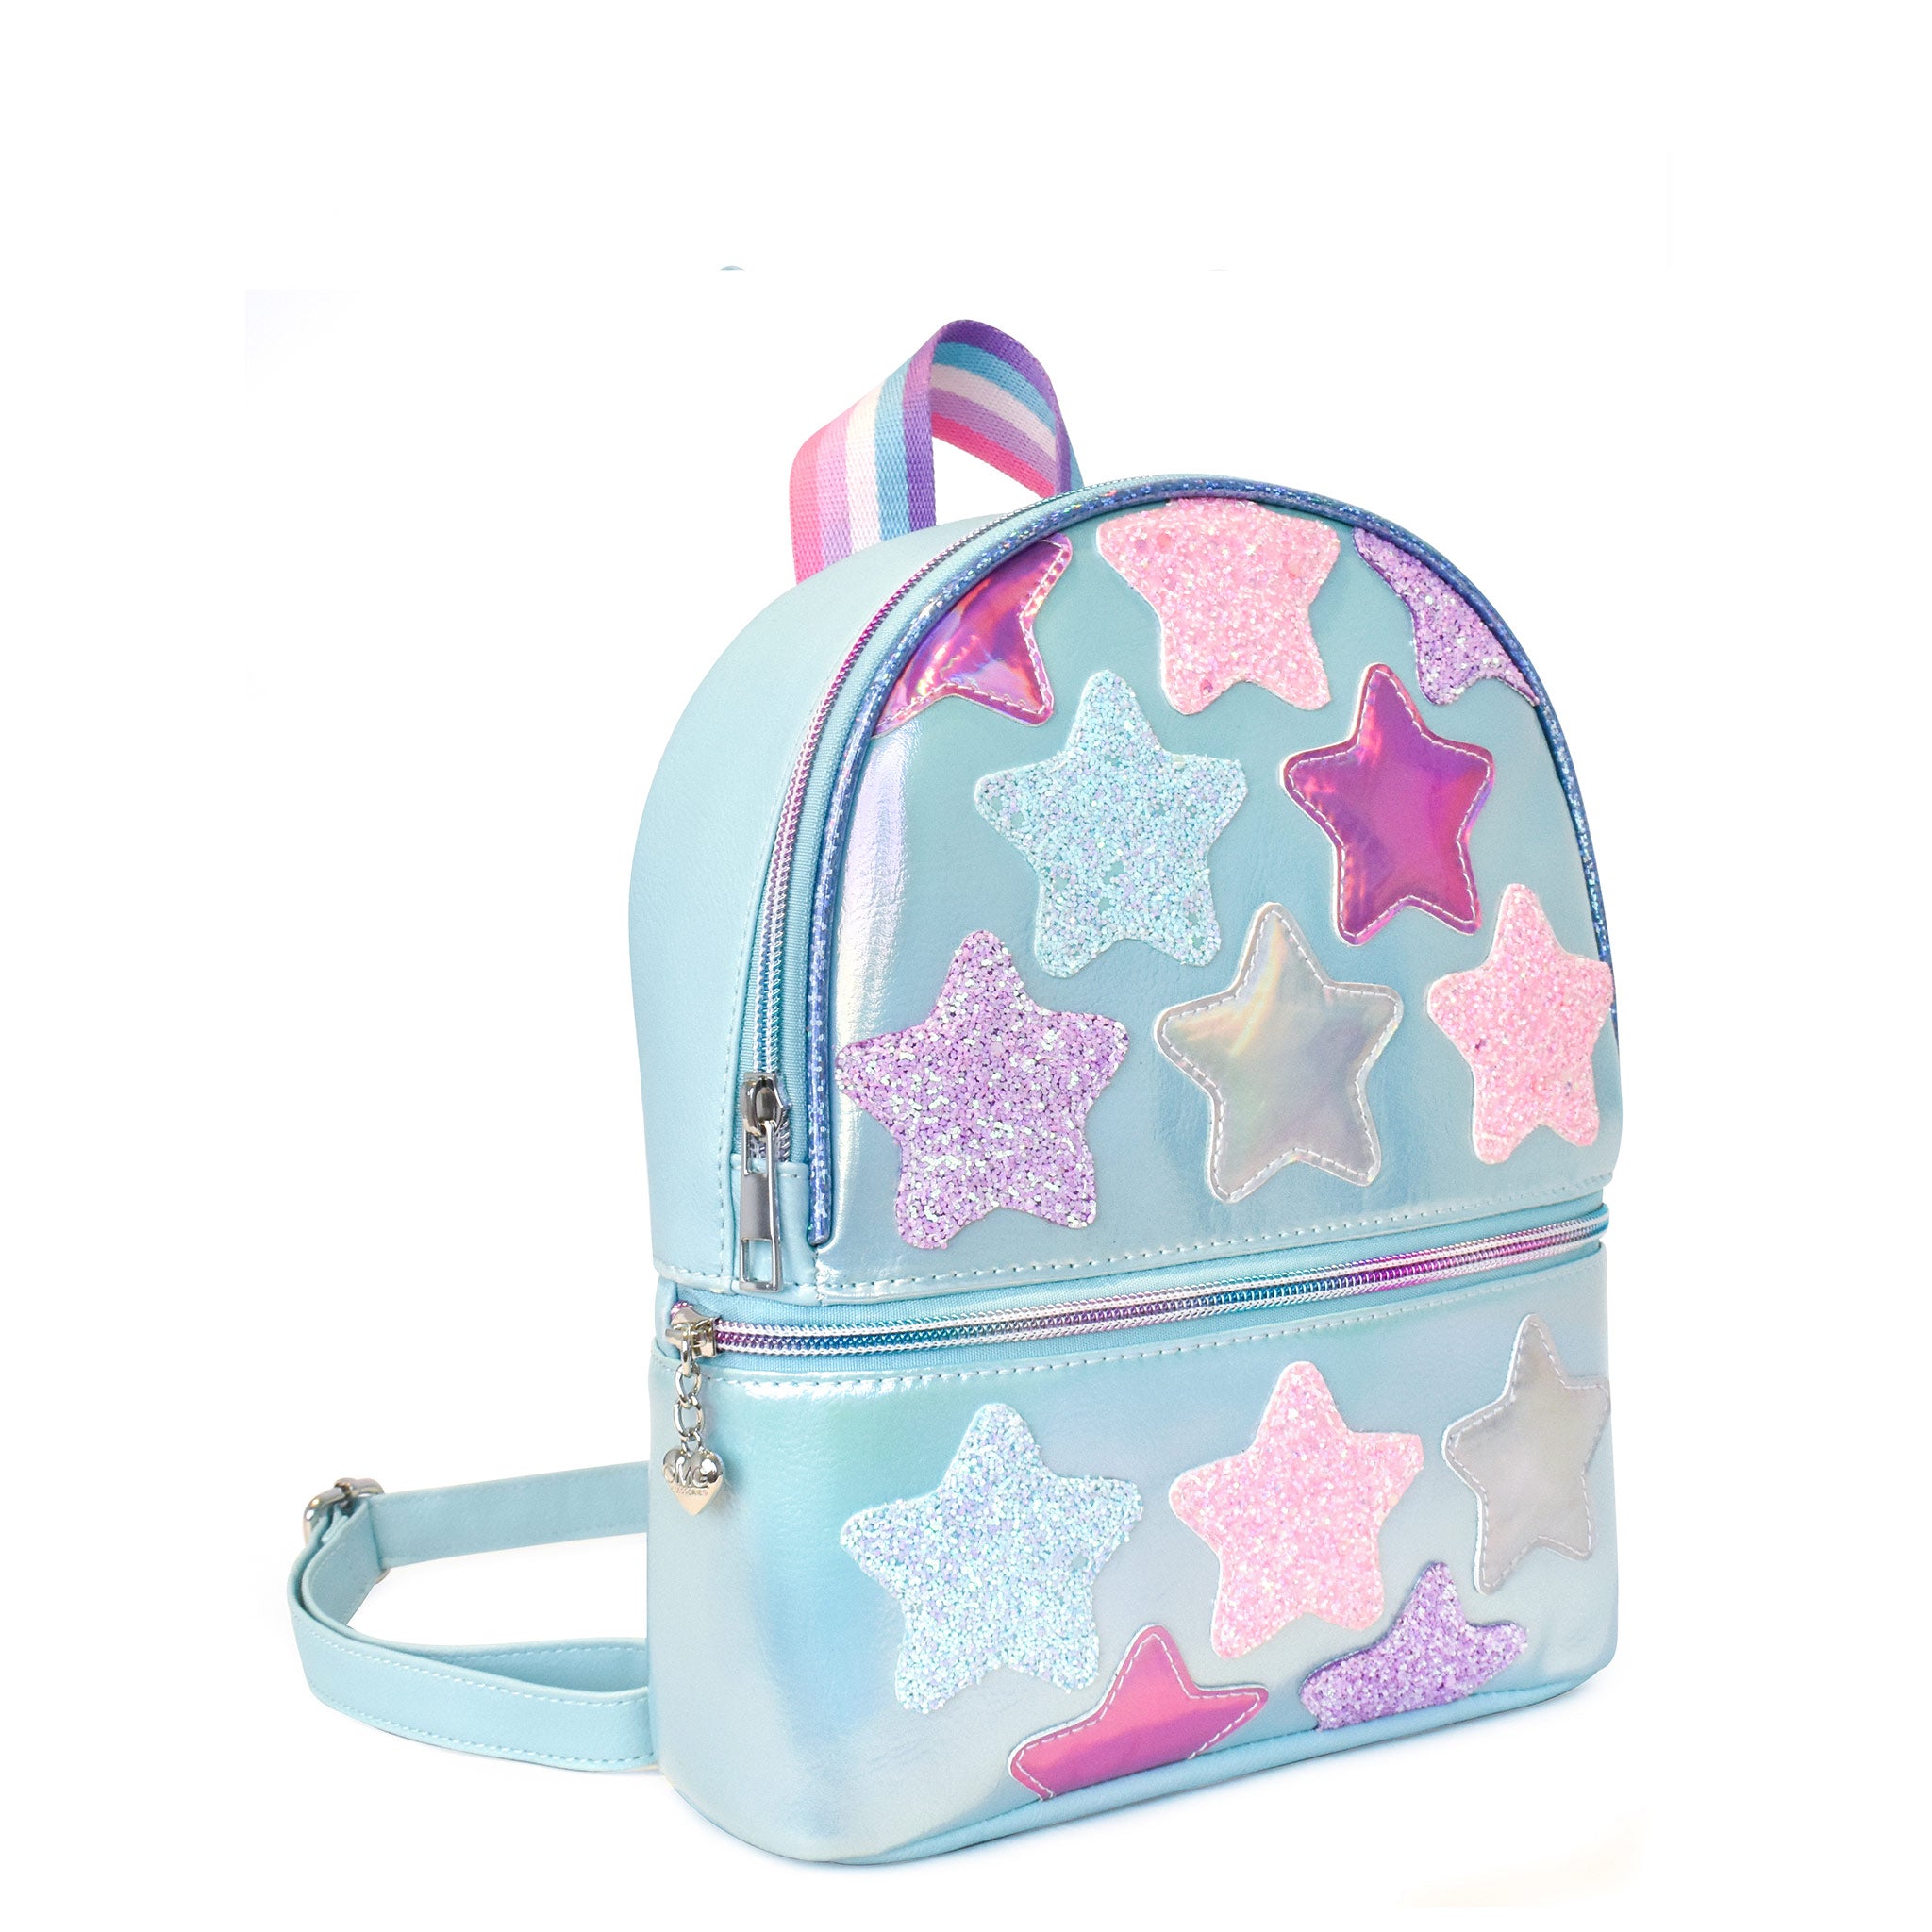 Side view of a blue metallic mini backpack with glitter and metallic star patches